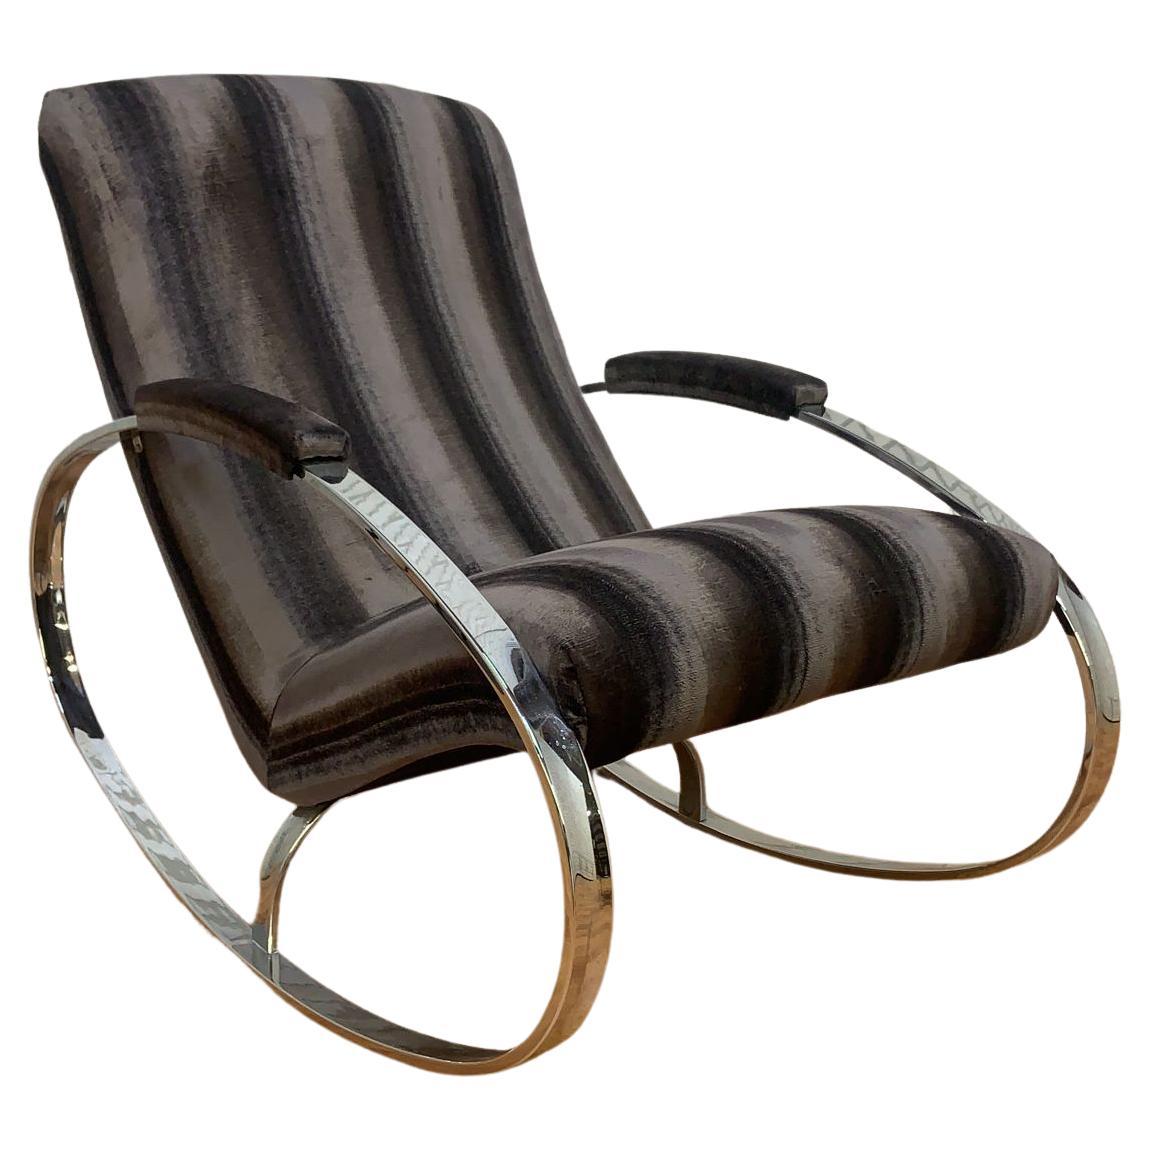 Midcentury Milo Baughman Chrome Flat Bar Oval Rocking Chair Newly Upholstered For Sale